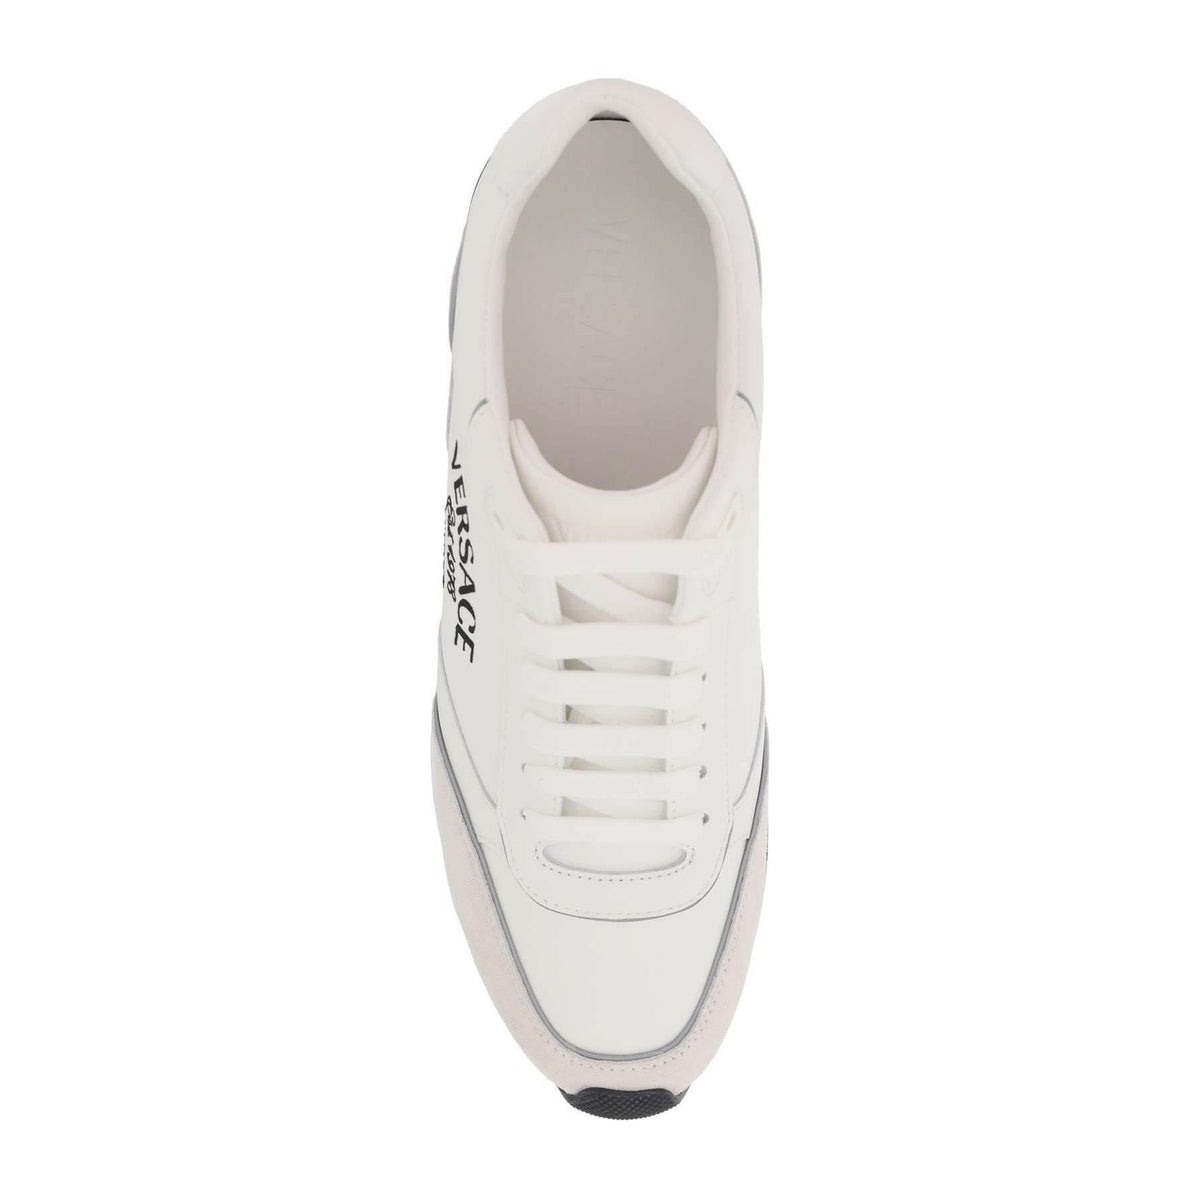 White Smooth And Suede Leather Milano Runner Sneakers With Embroidered Lettering VERSACE JOHN JULIA.